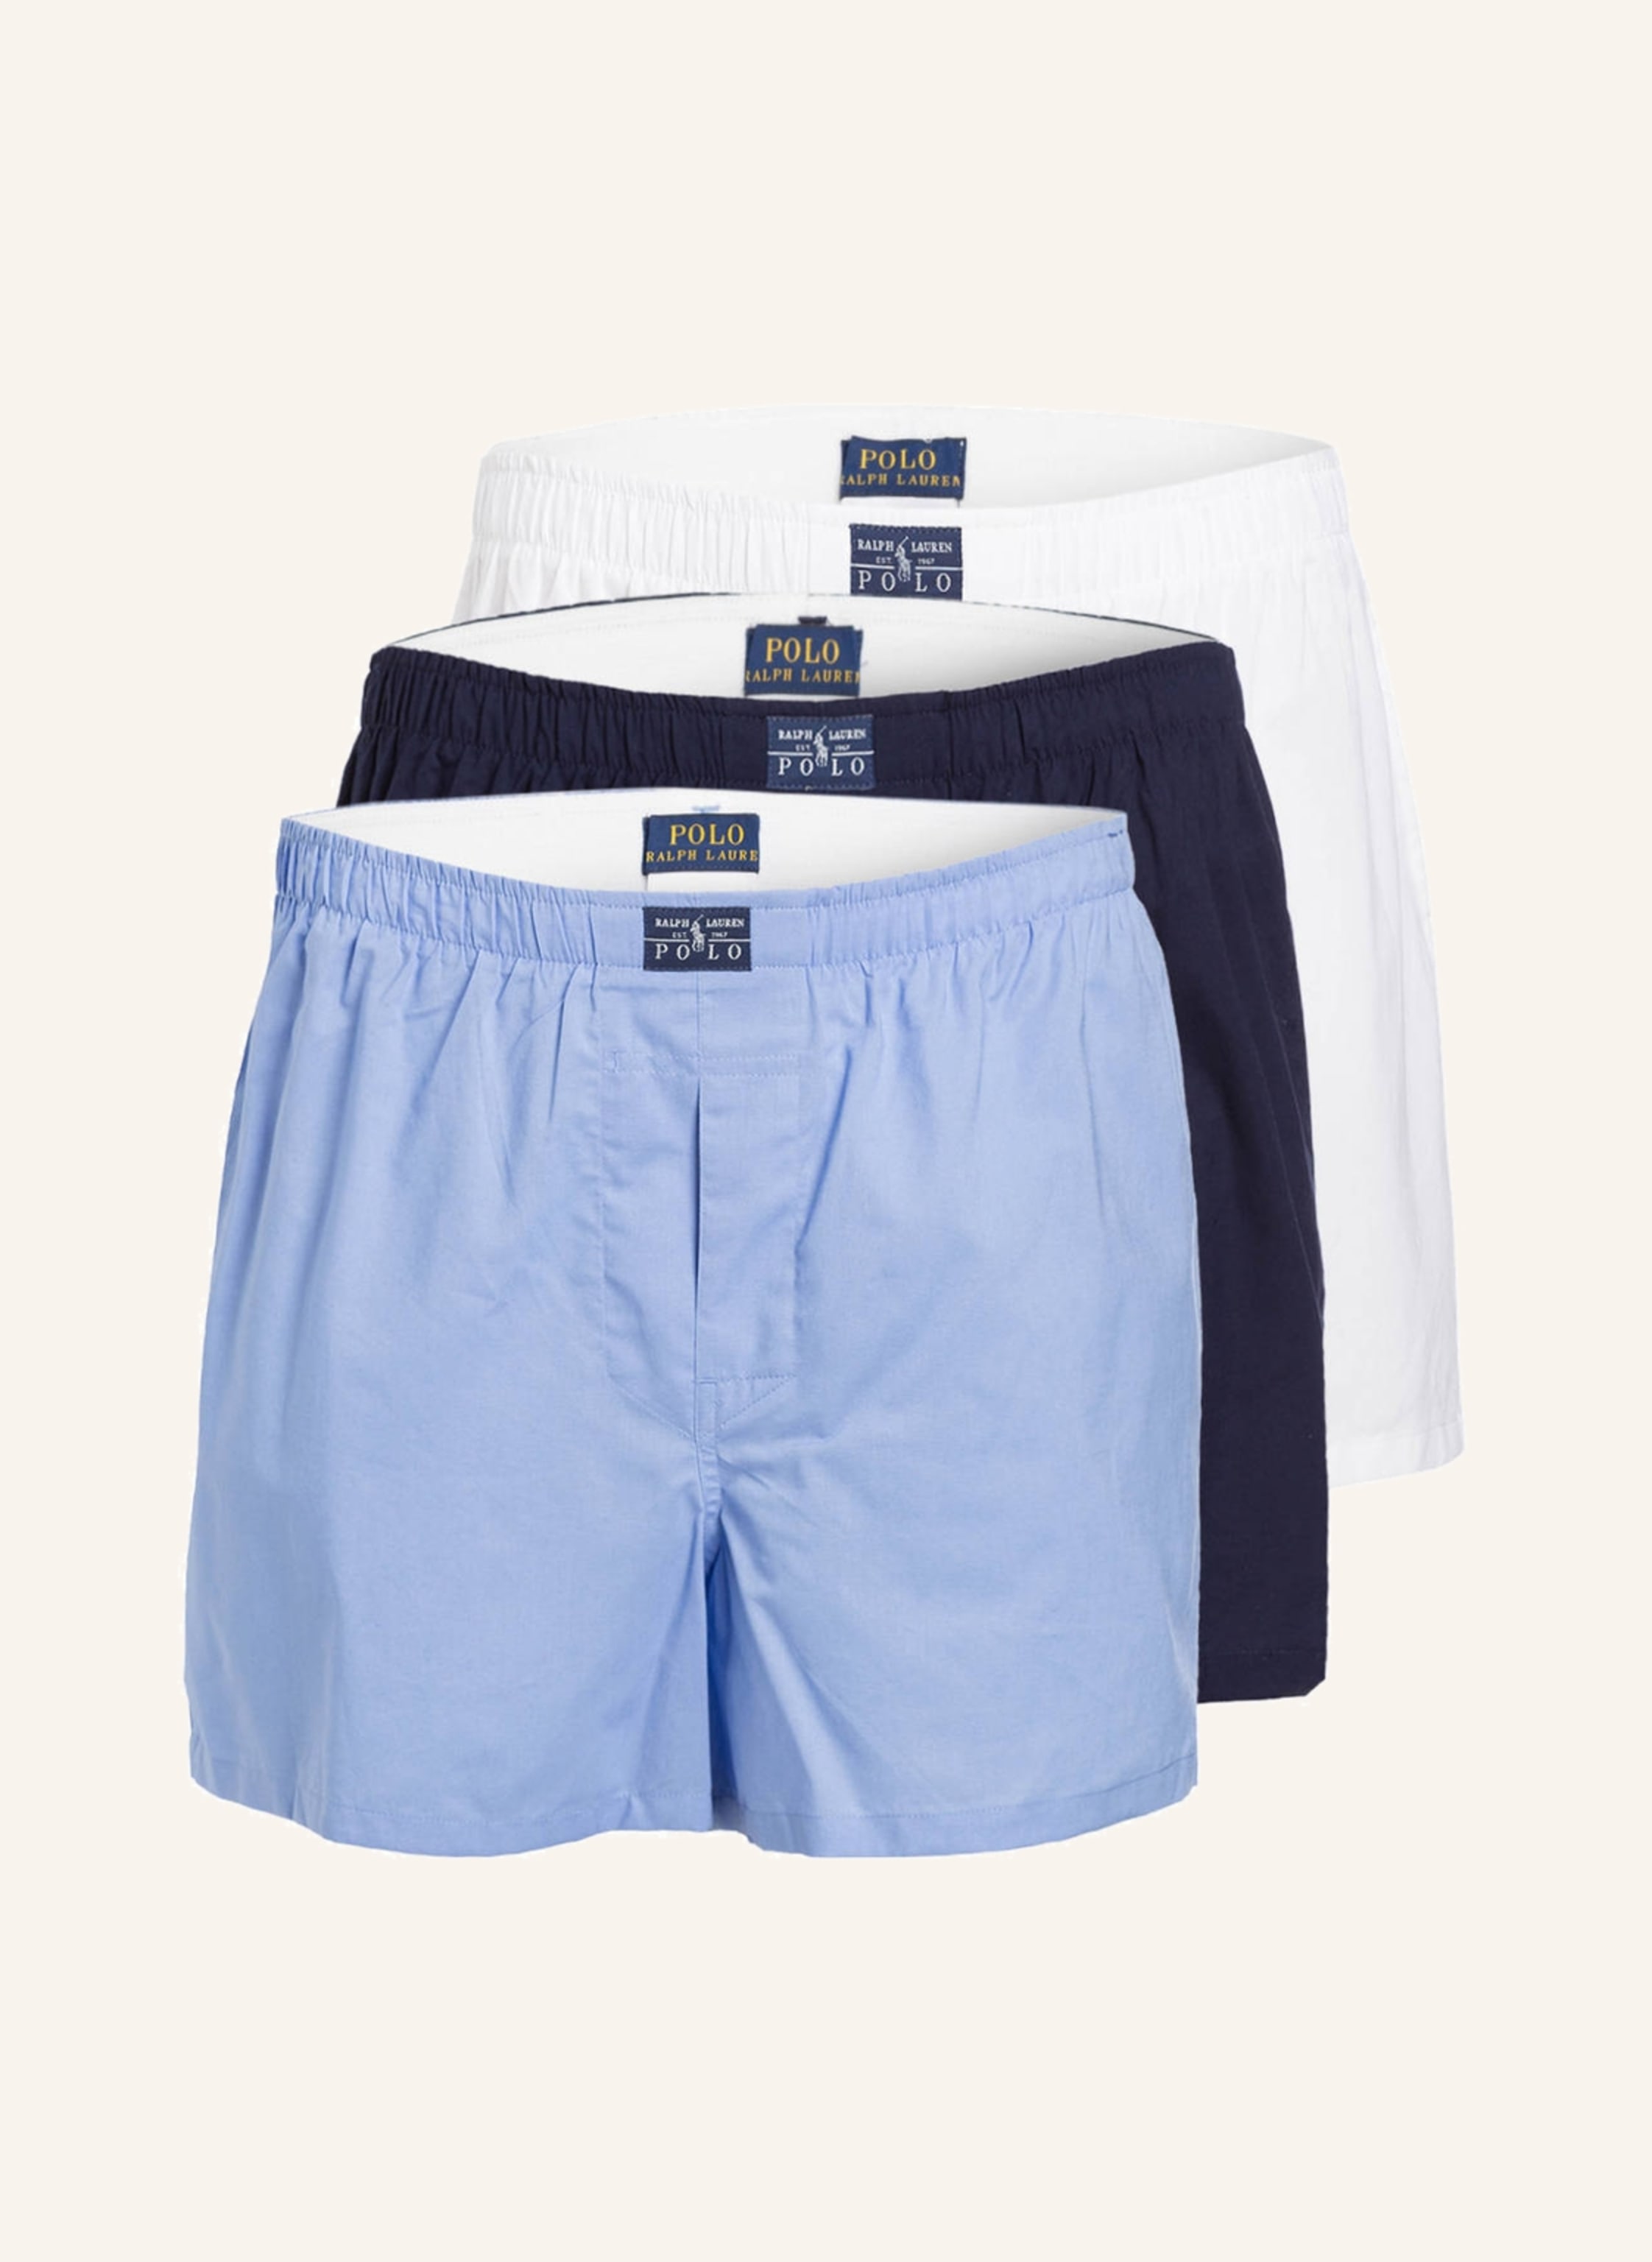 Polo Ralph Lauren 3 Pack Open Boxer, Save 20% on Subscription